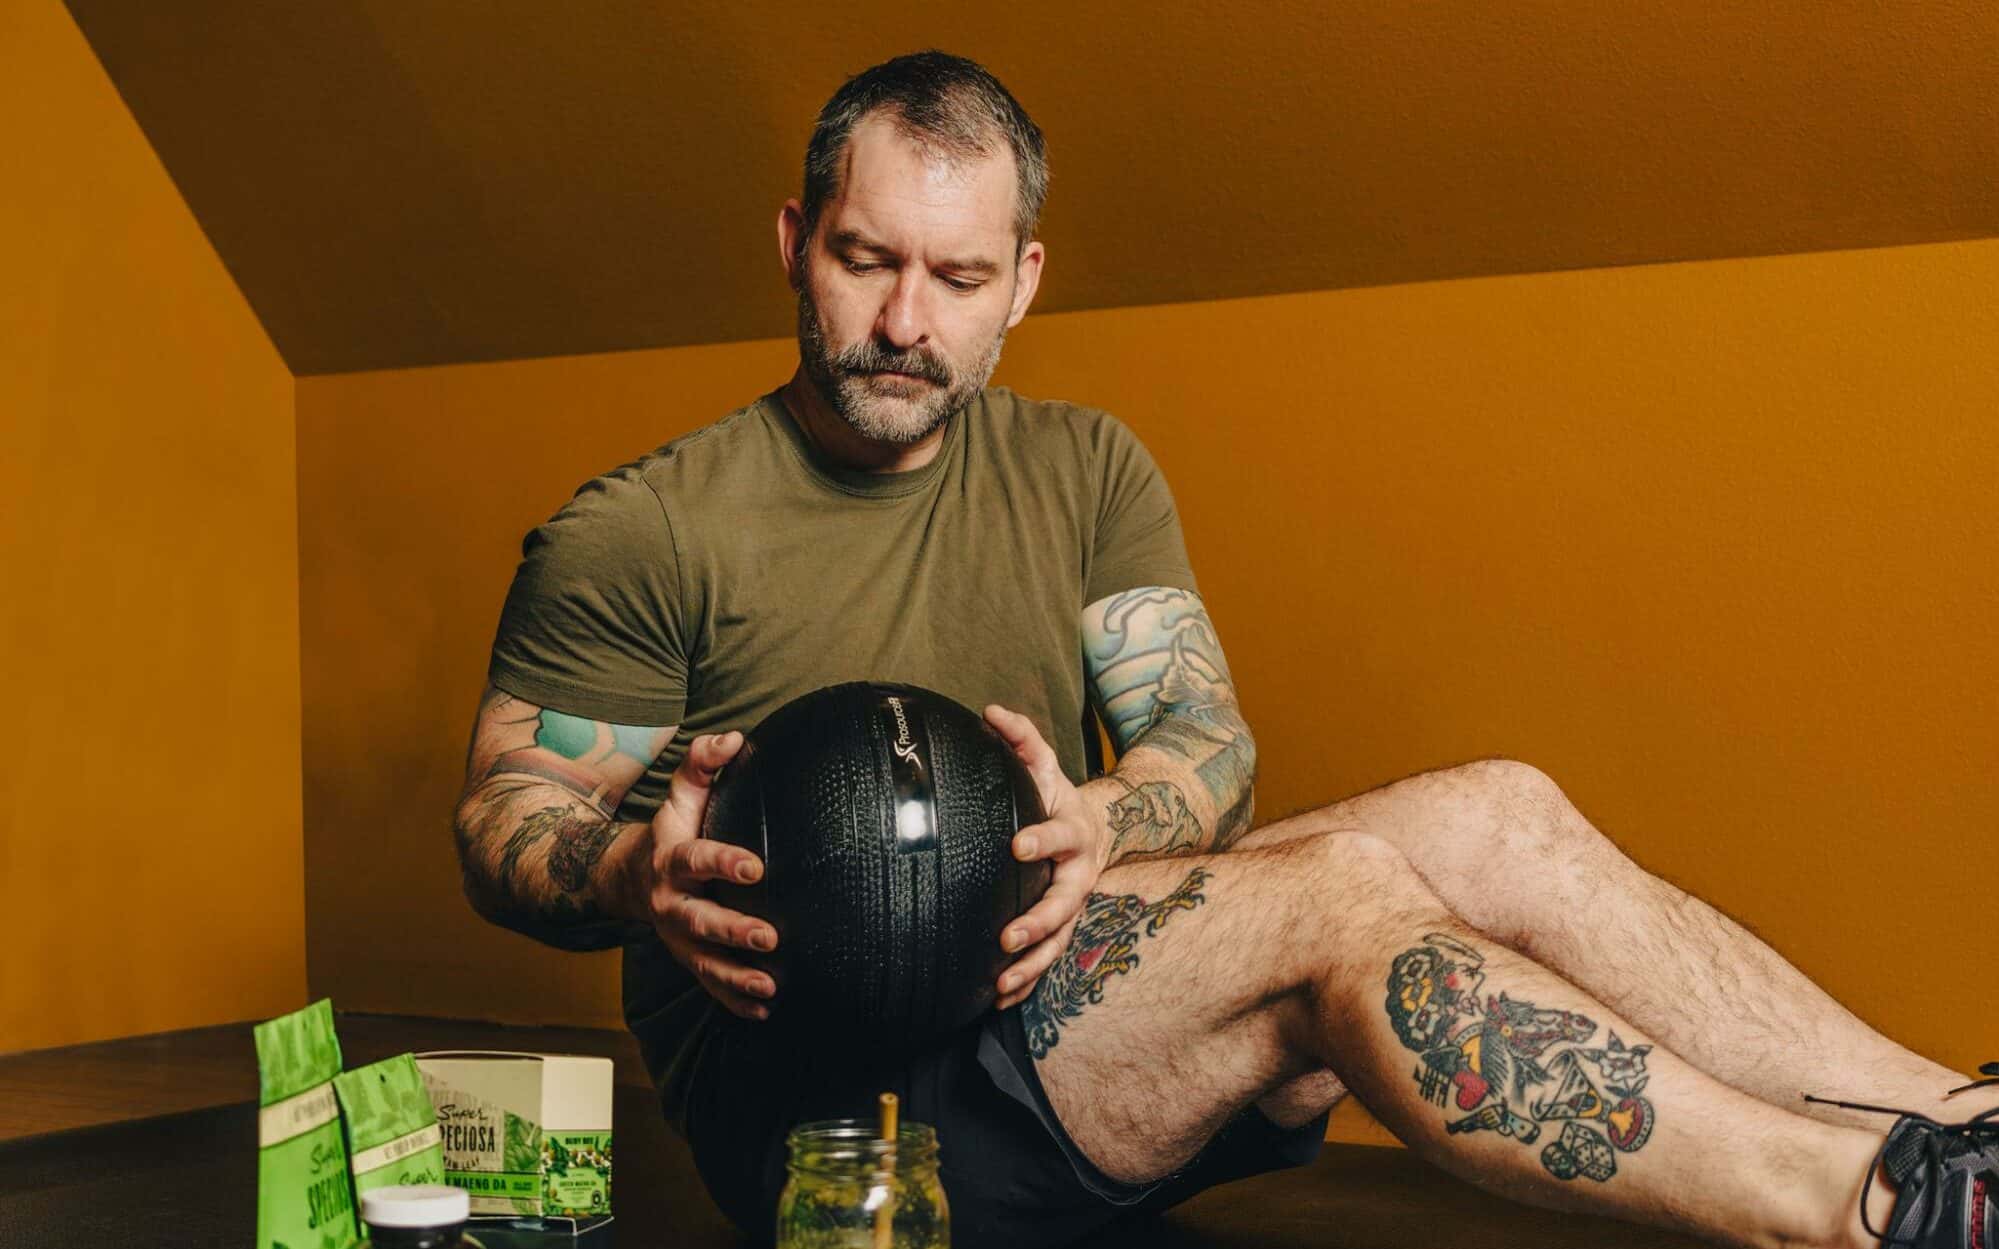 Man exercising while drinking green kratom drink and next to assortment of Green Maeng Da kratom products, like capsules, powder, and tablets. Green Kratom is used for energy.